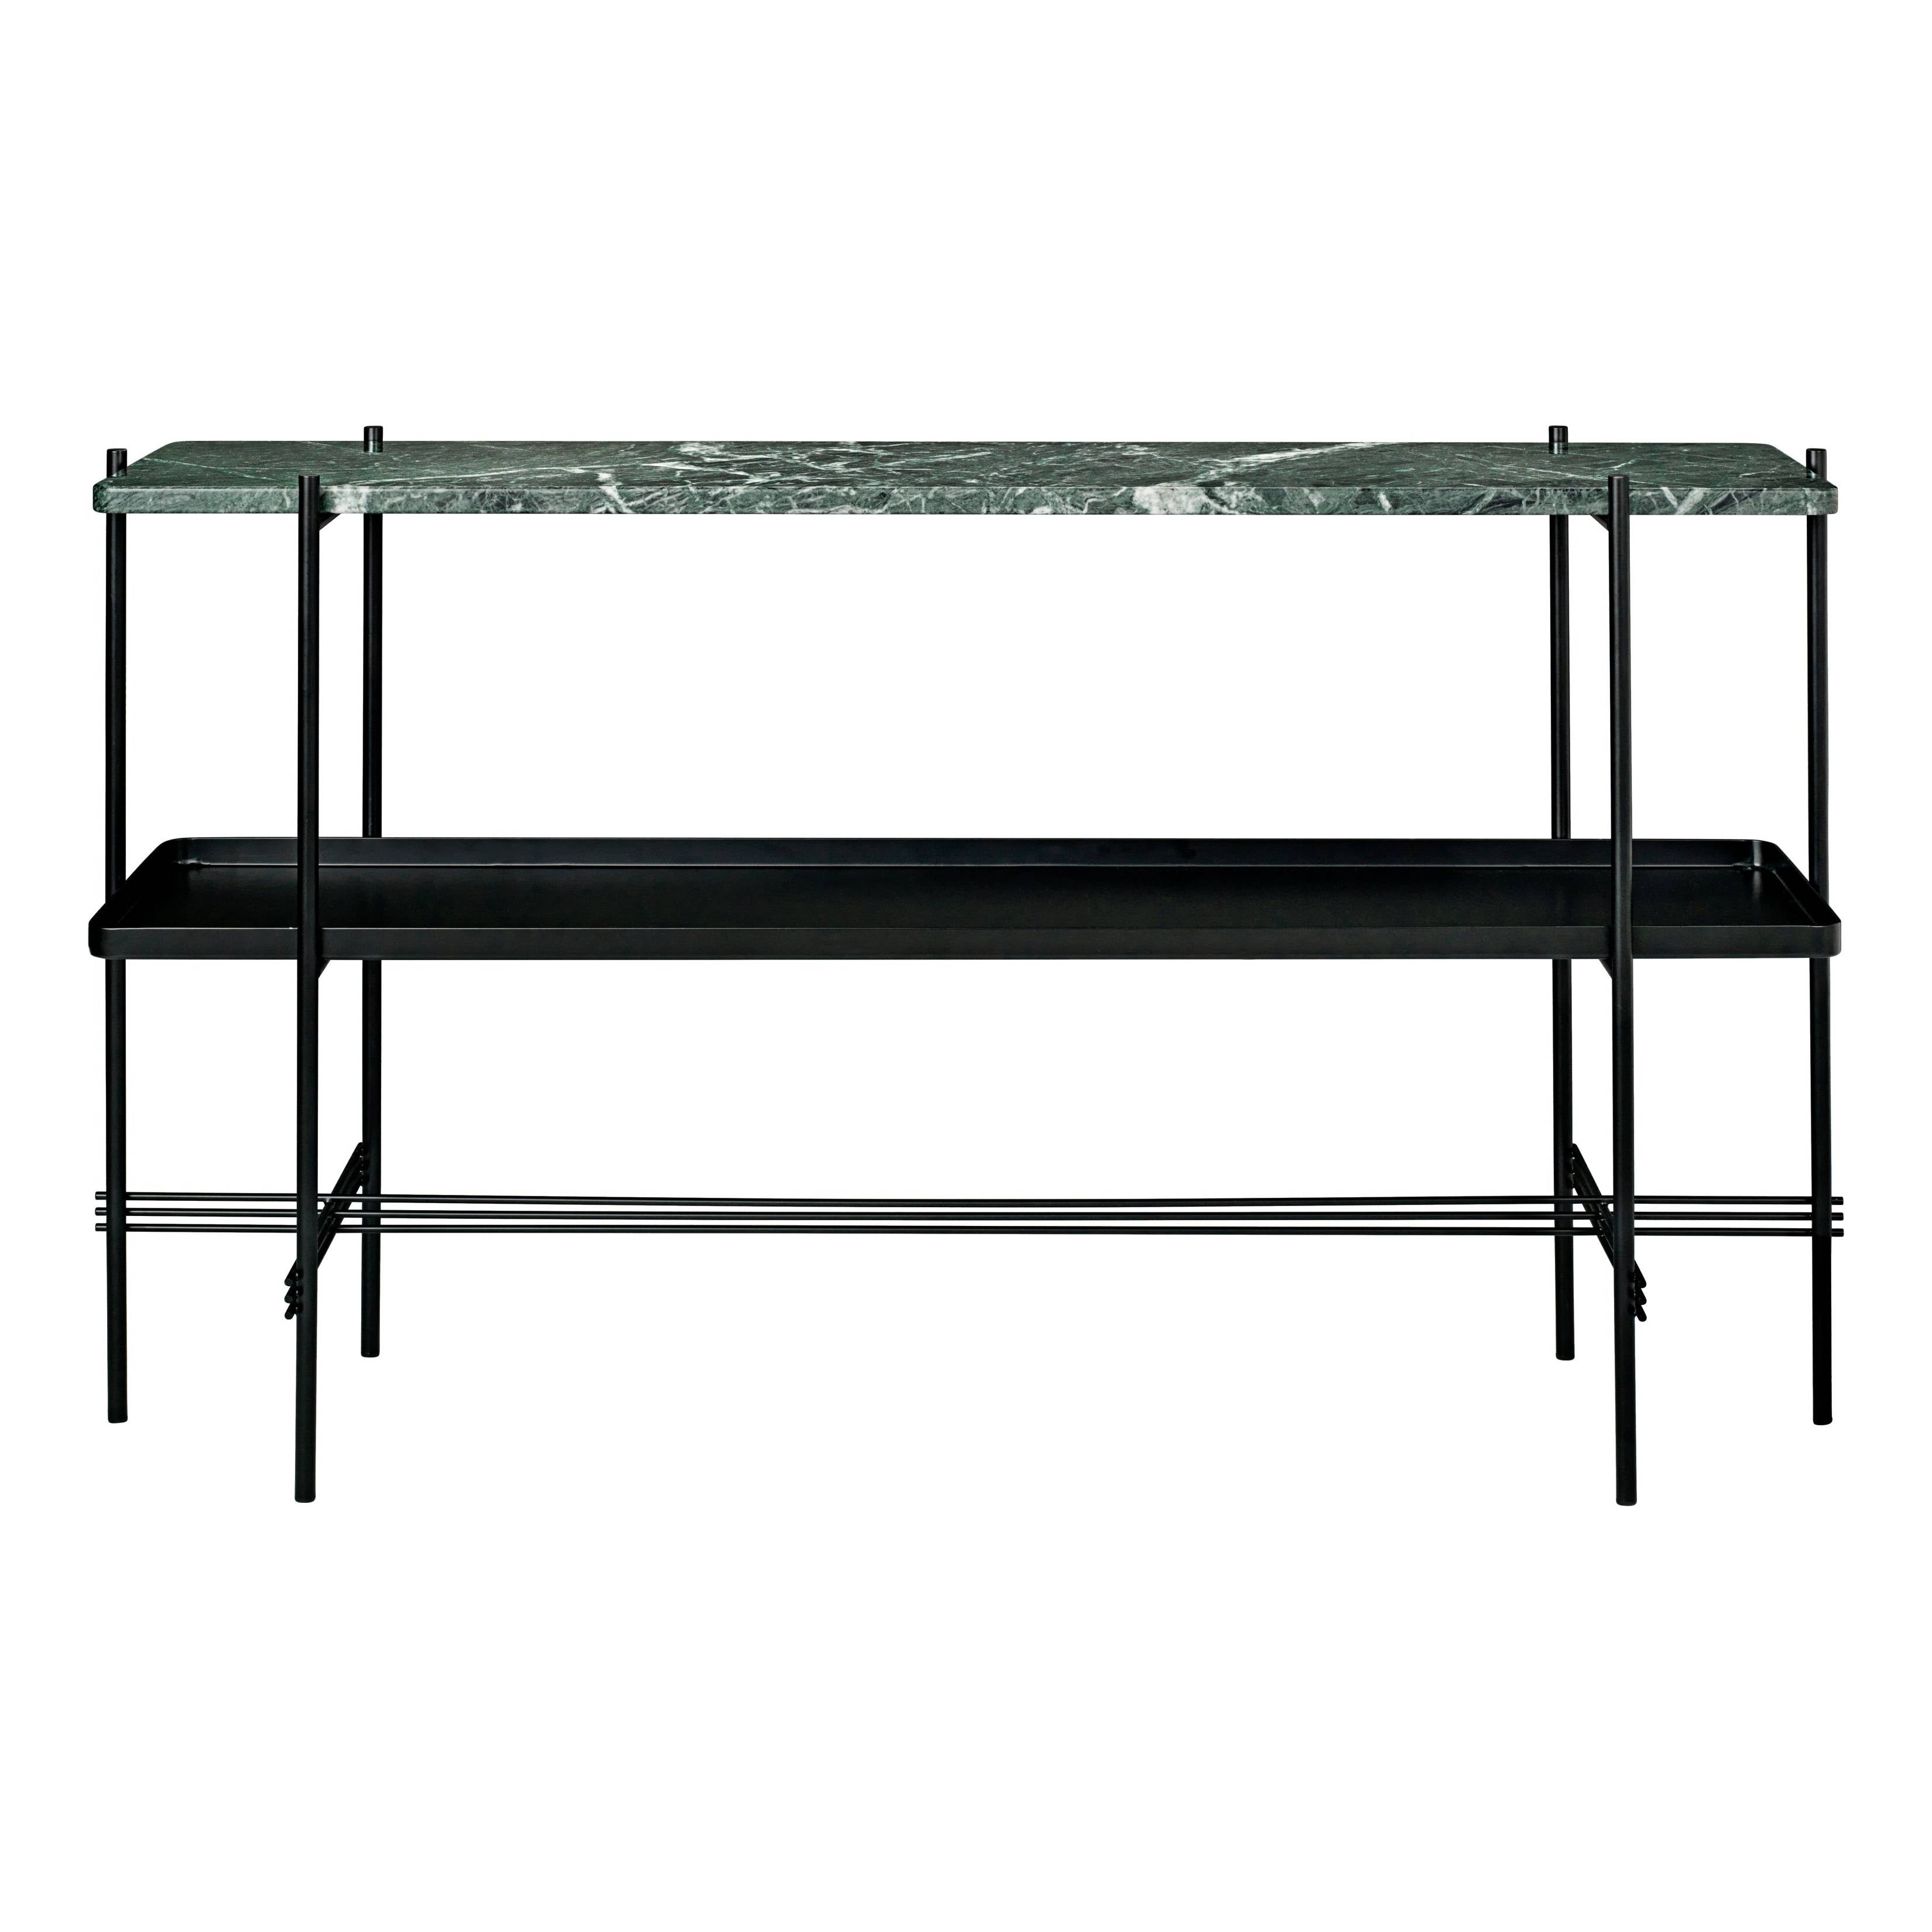 TS Console: With Tray + Black + Green Guatemala Marble